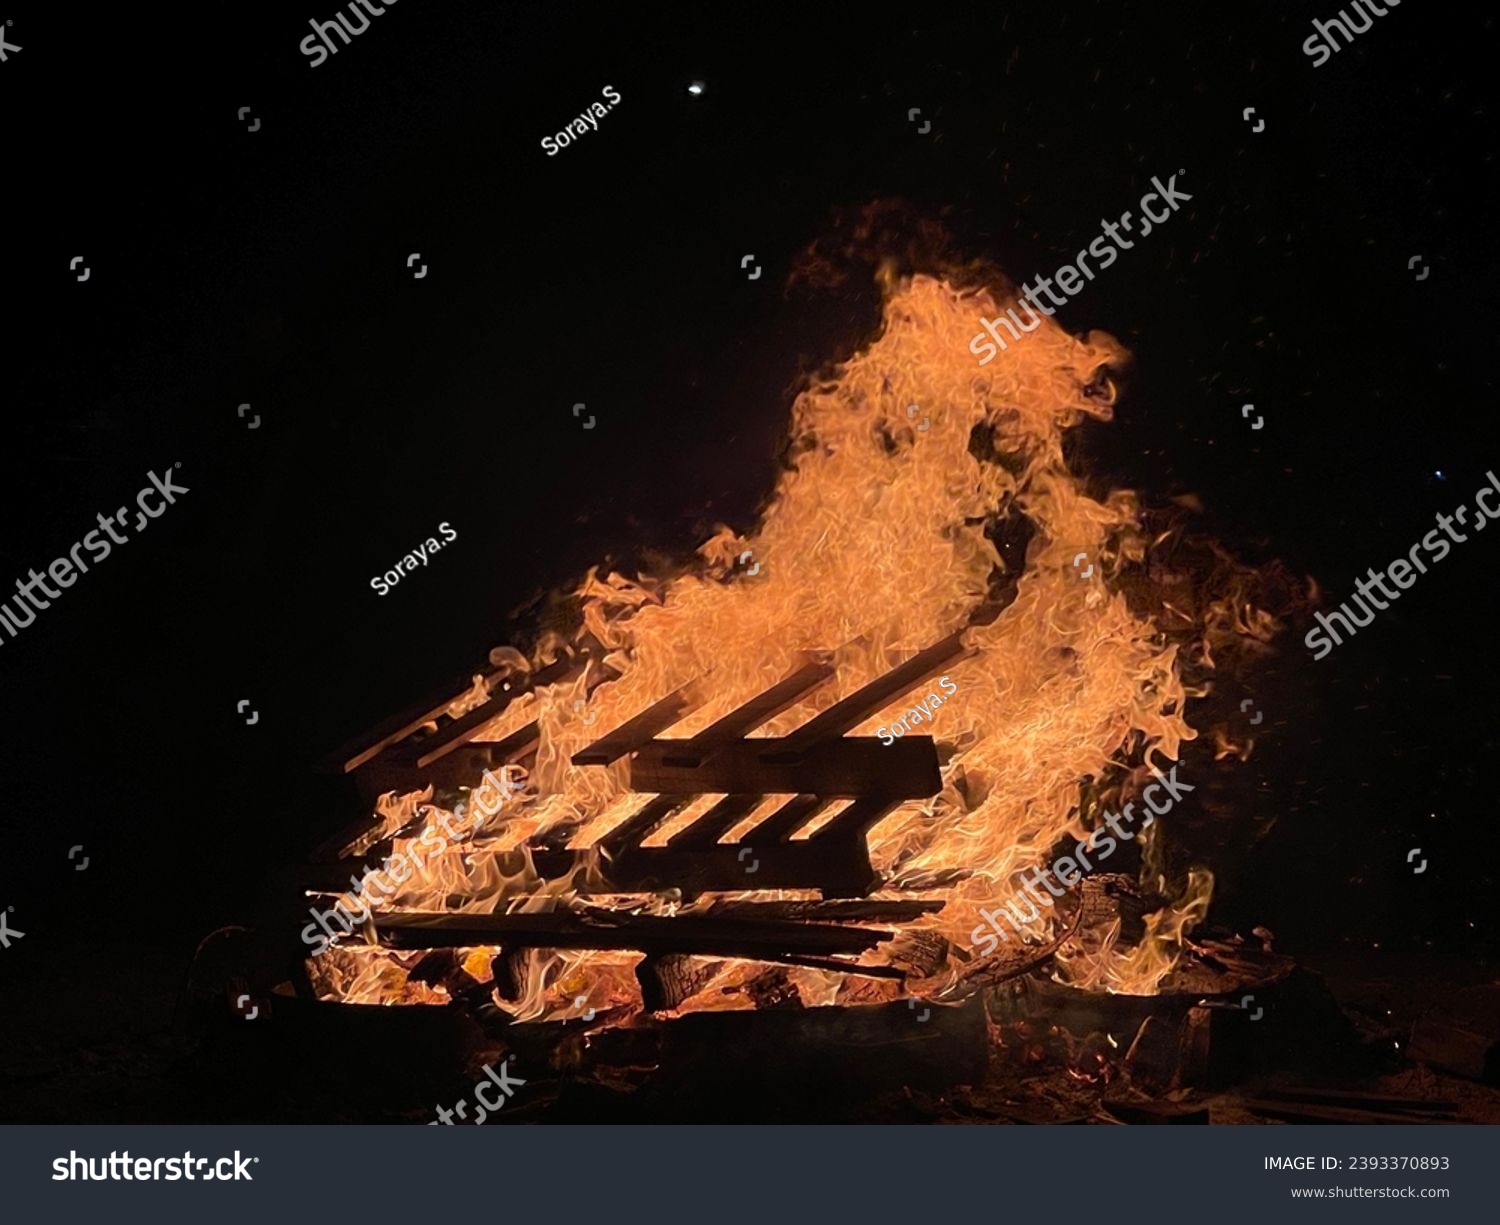 A campfire at campsite that provide light, warmth and heat for cooking. Campfires are a popular feature of camping. Dark background seen with pallete burning #2393370893